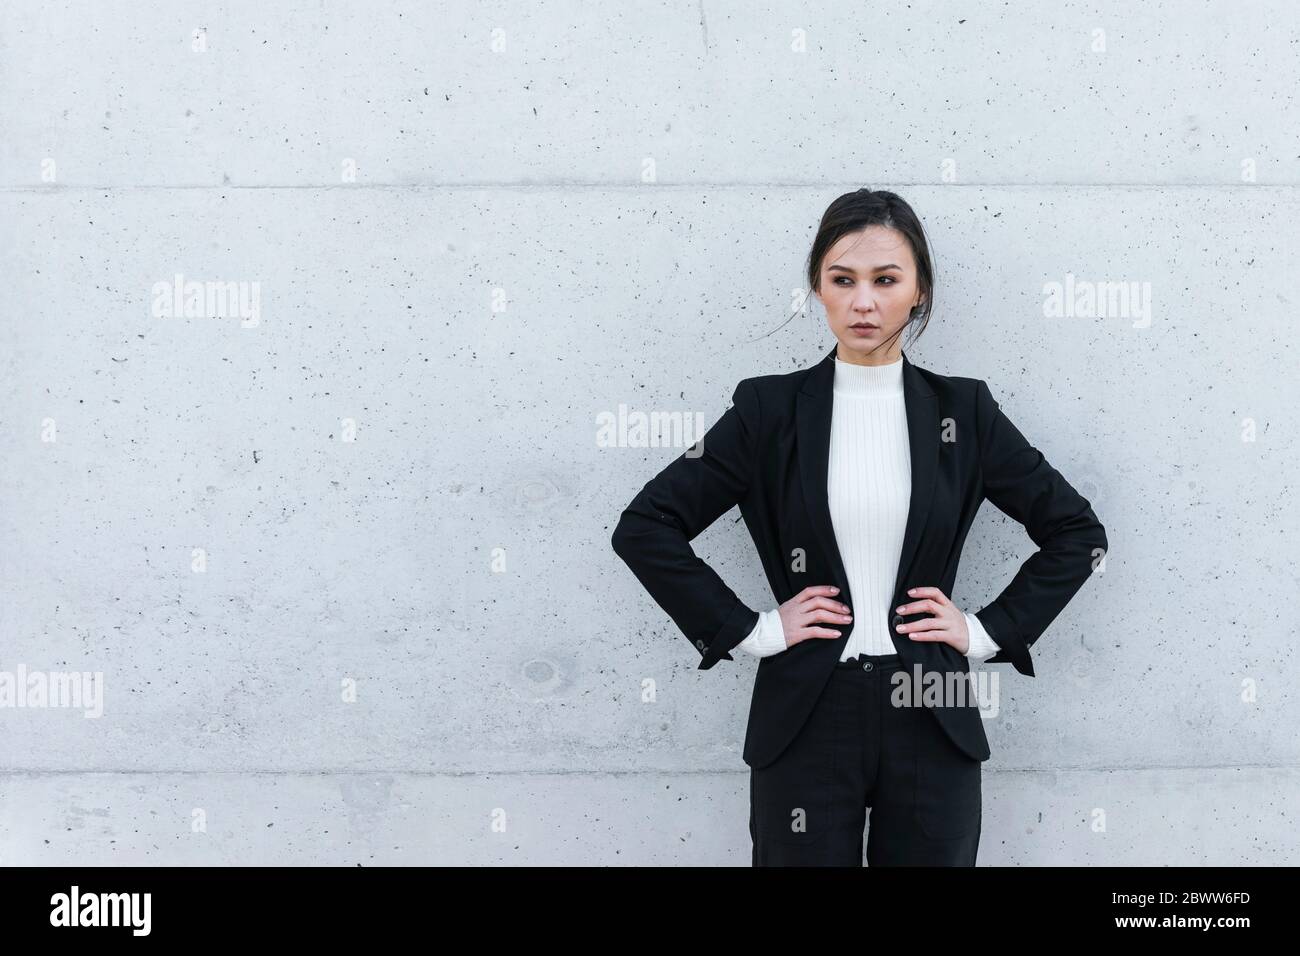 Happy Relaxed Elegant Business Woman Walking and Buttoning Black Suit.  Stock Image - Image of female, achievement: 142198409